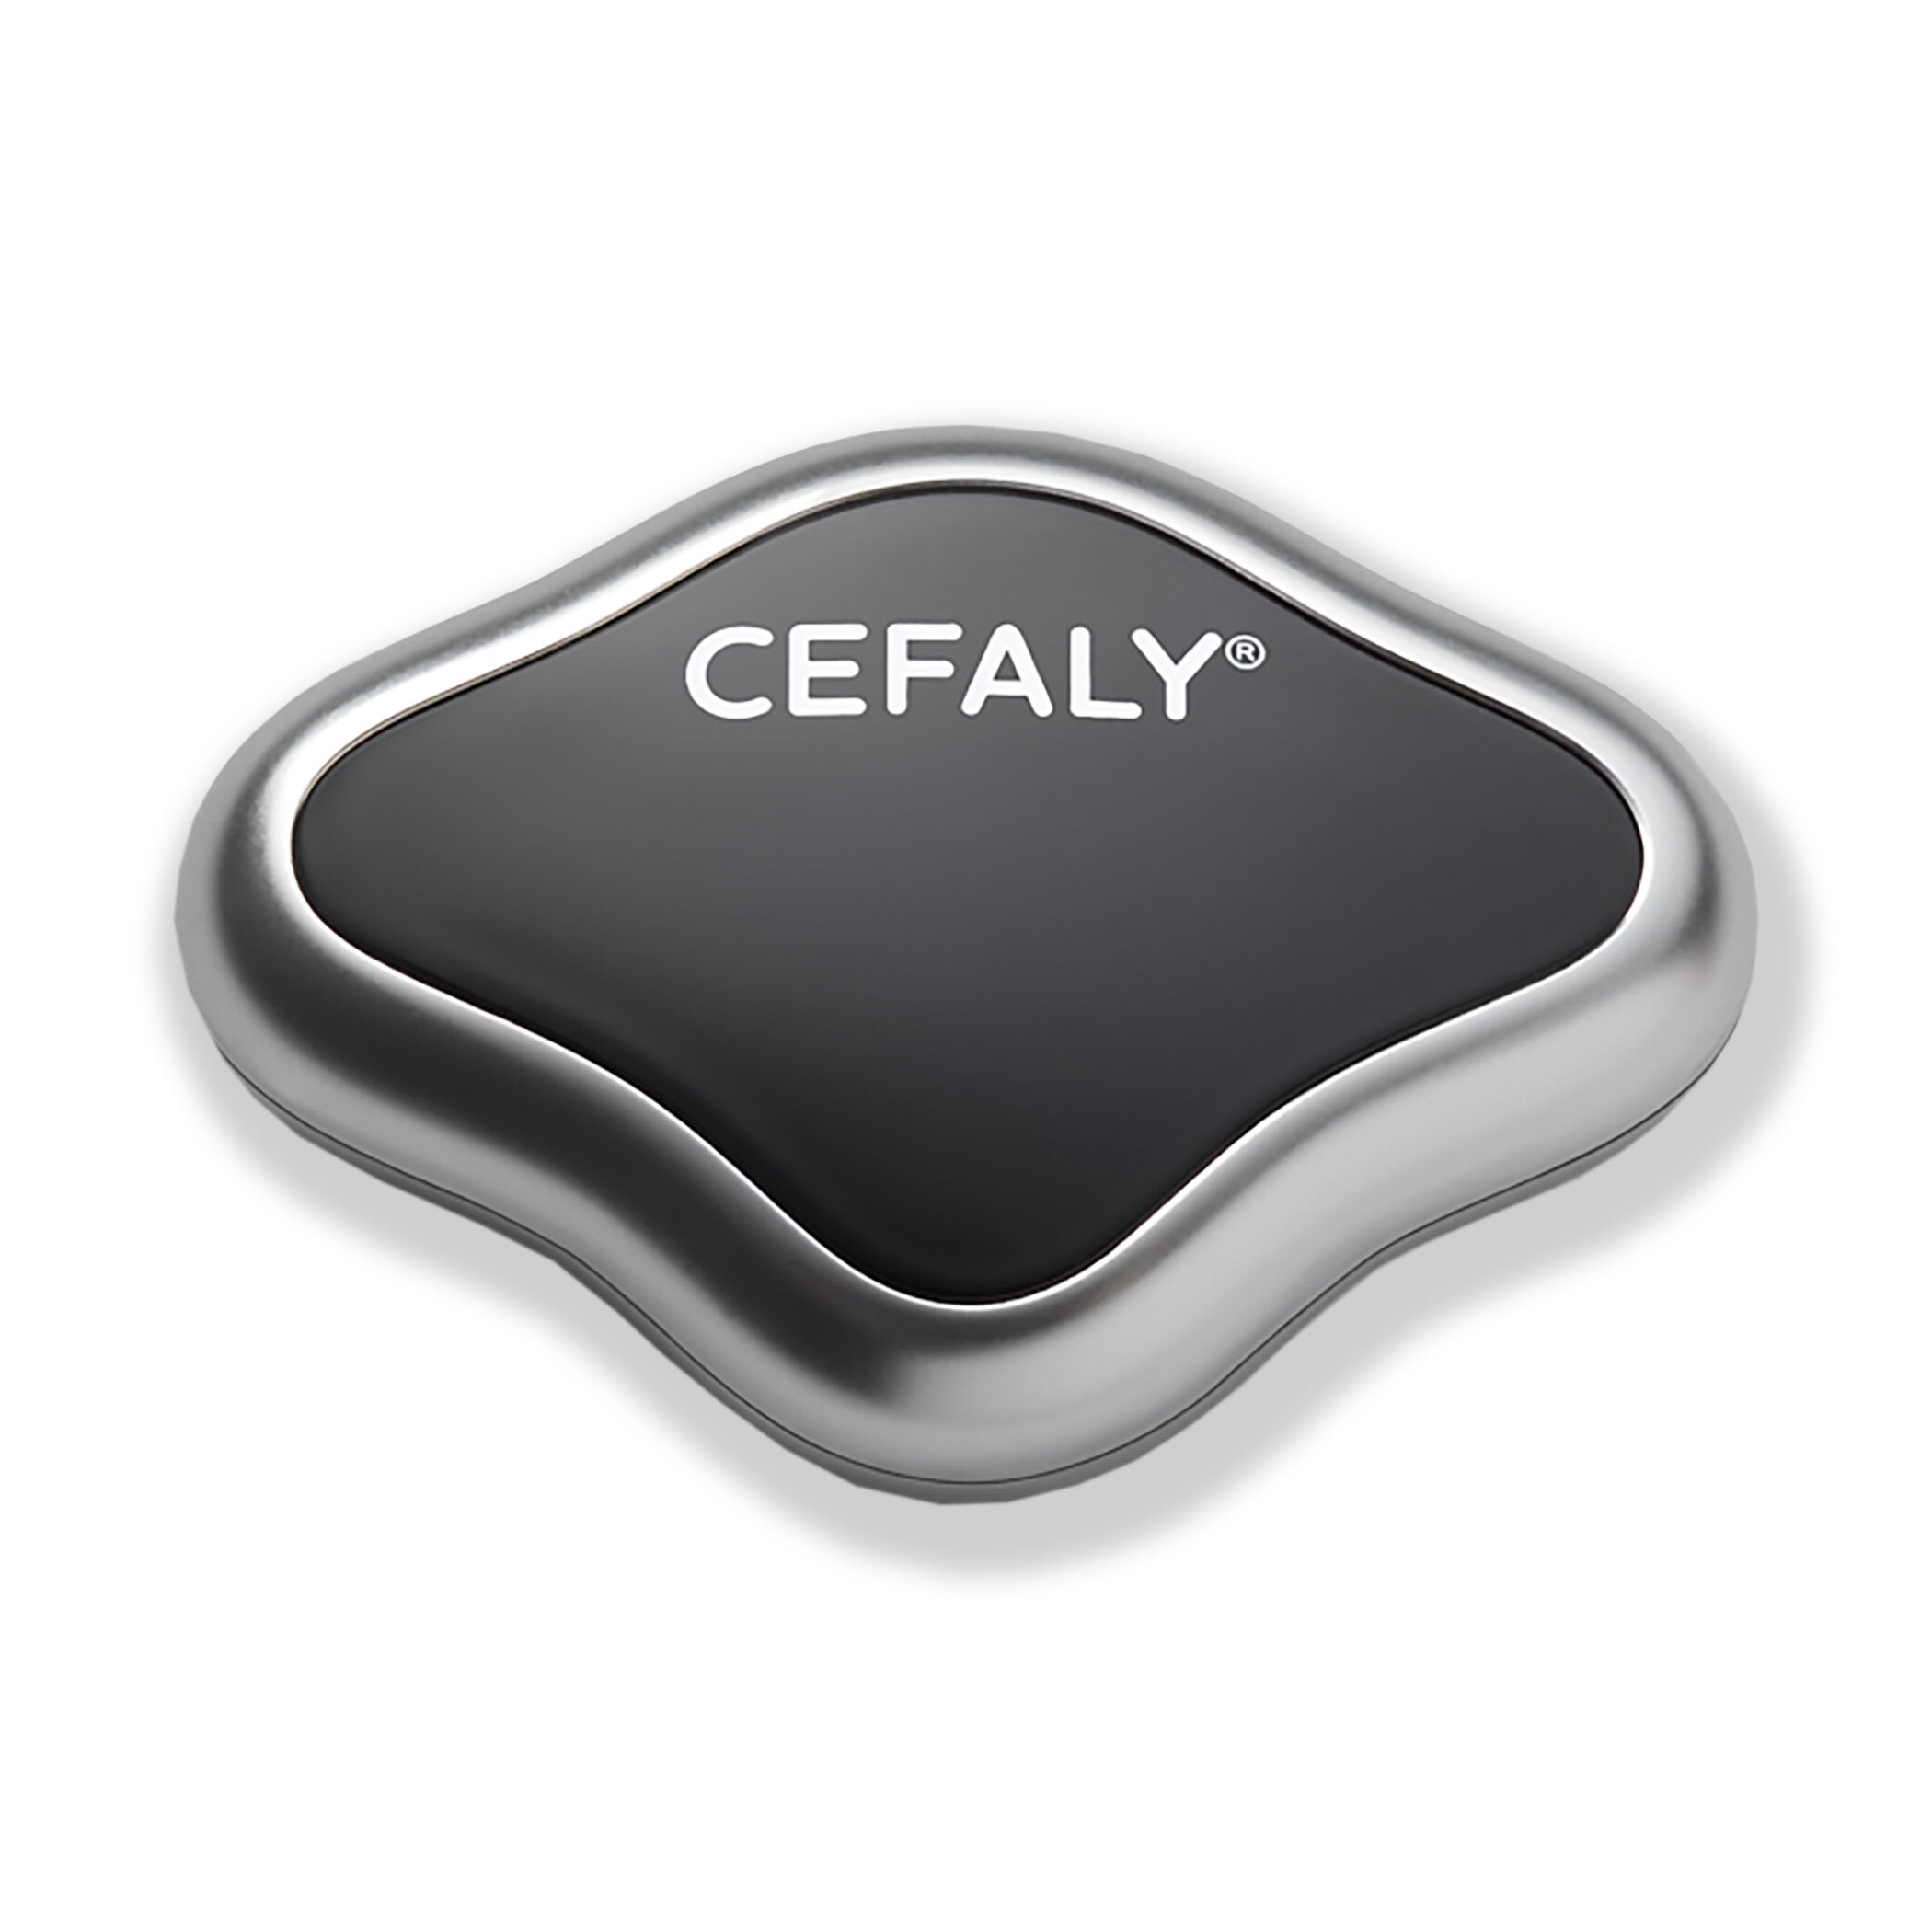  What is included with the Cefaly Migraine treatment and prevention device  7